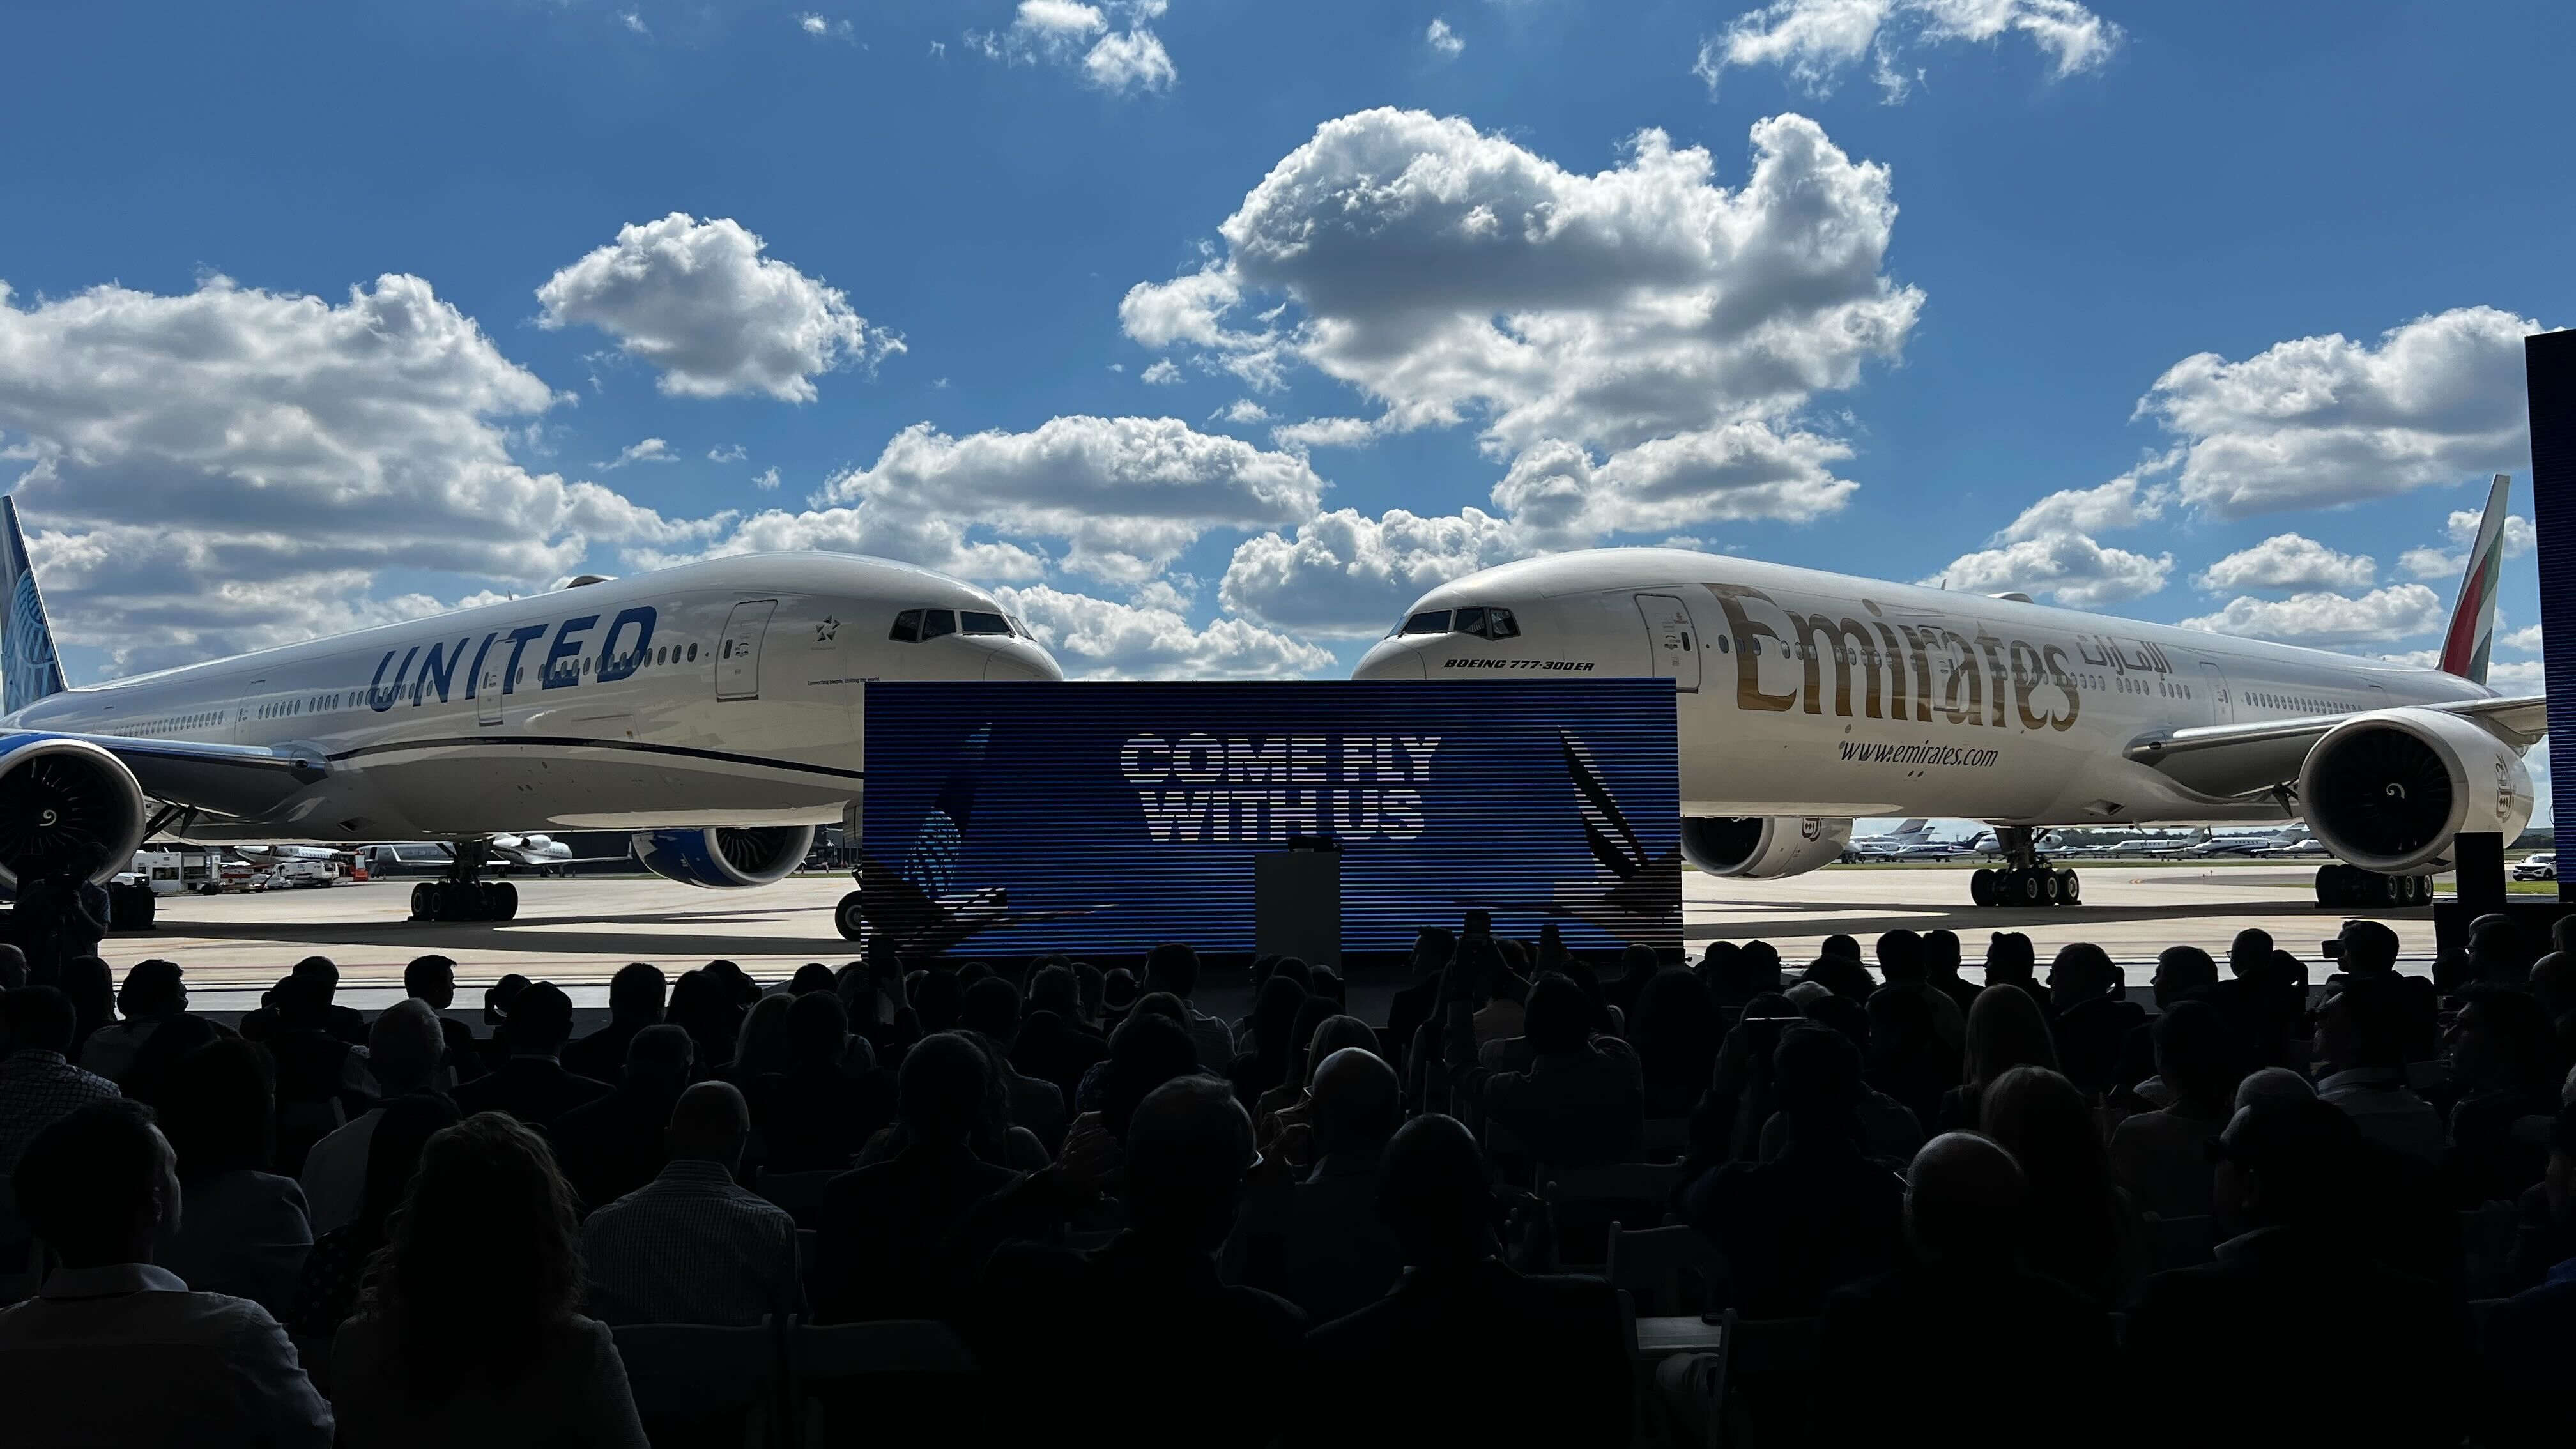 United airlines and emirates partnership annoucement